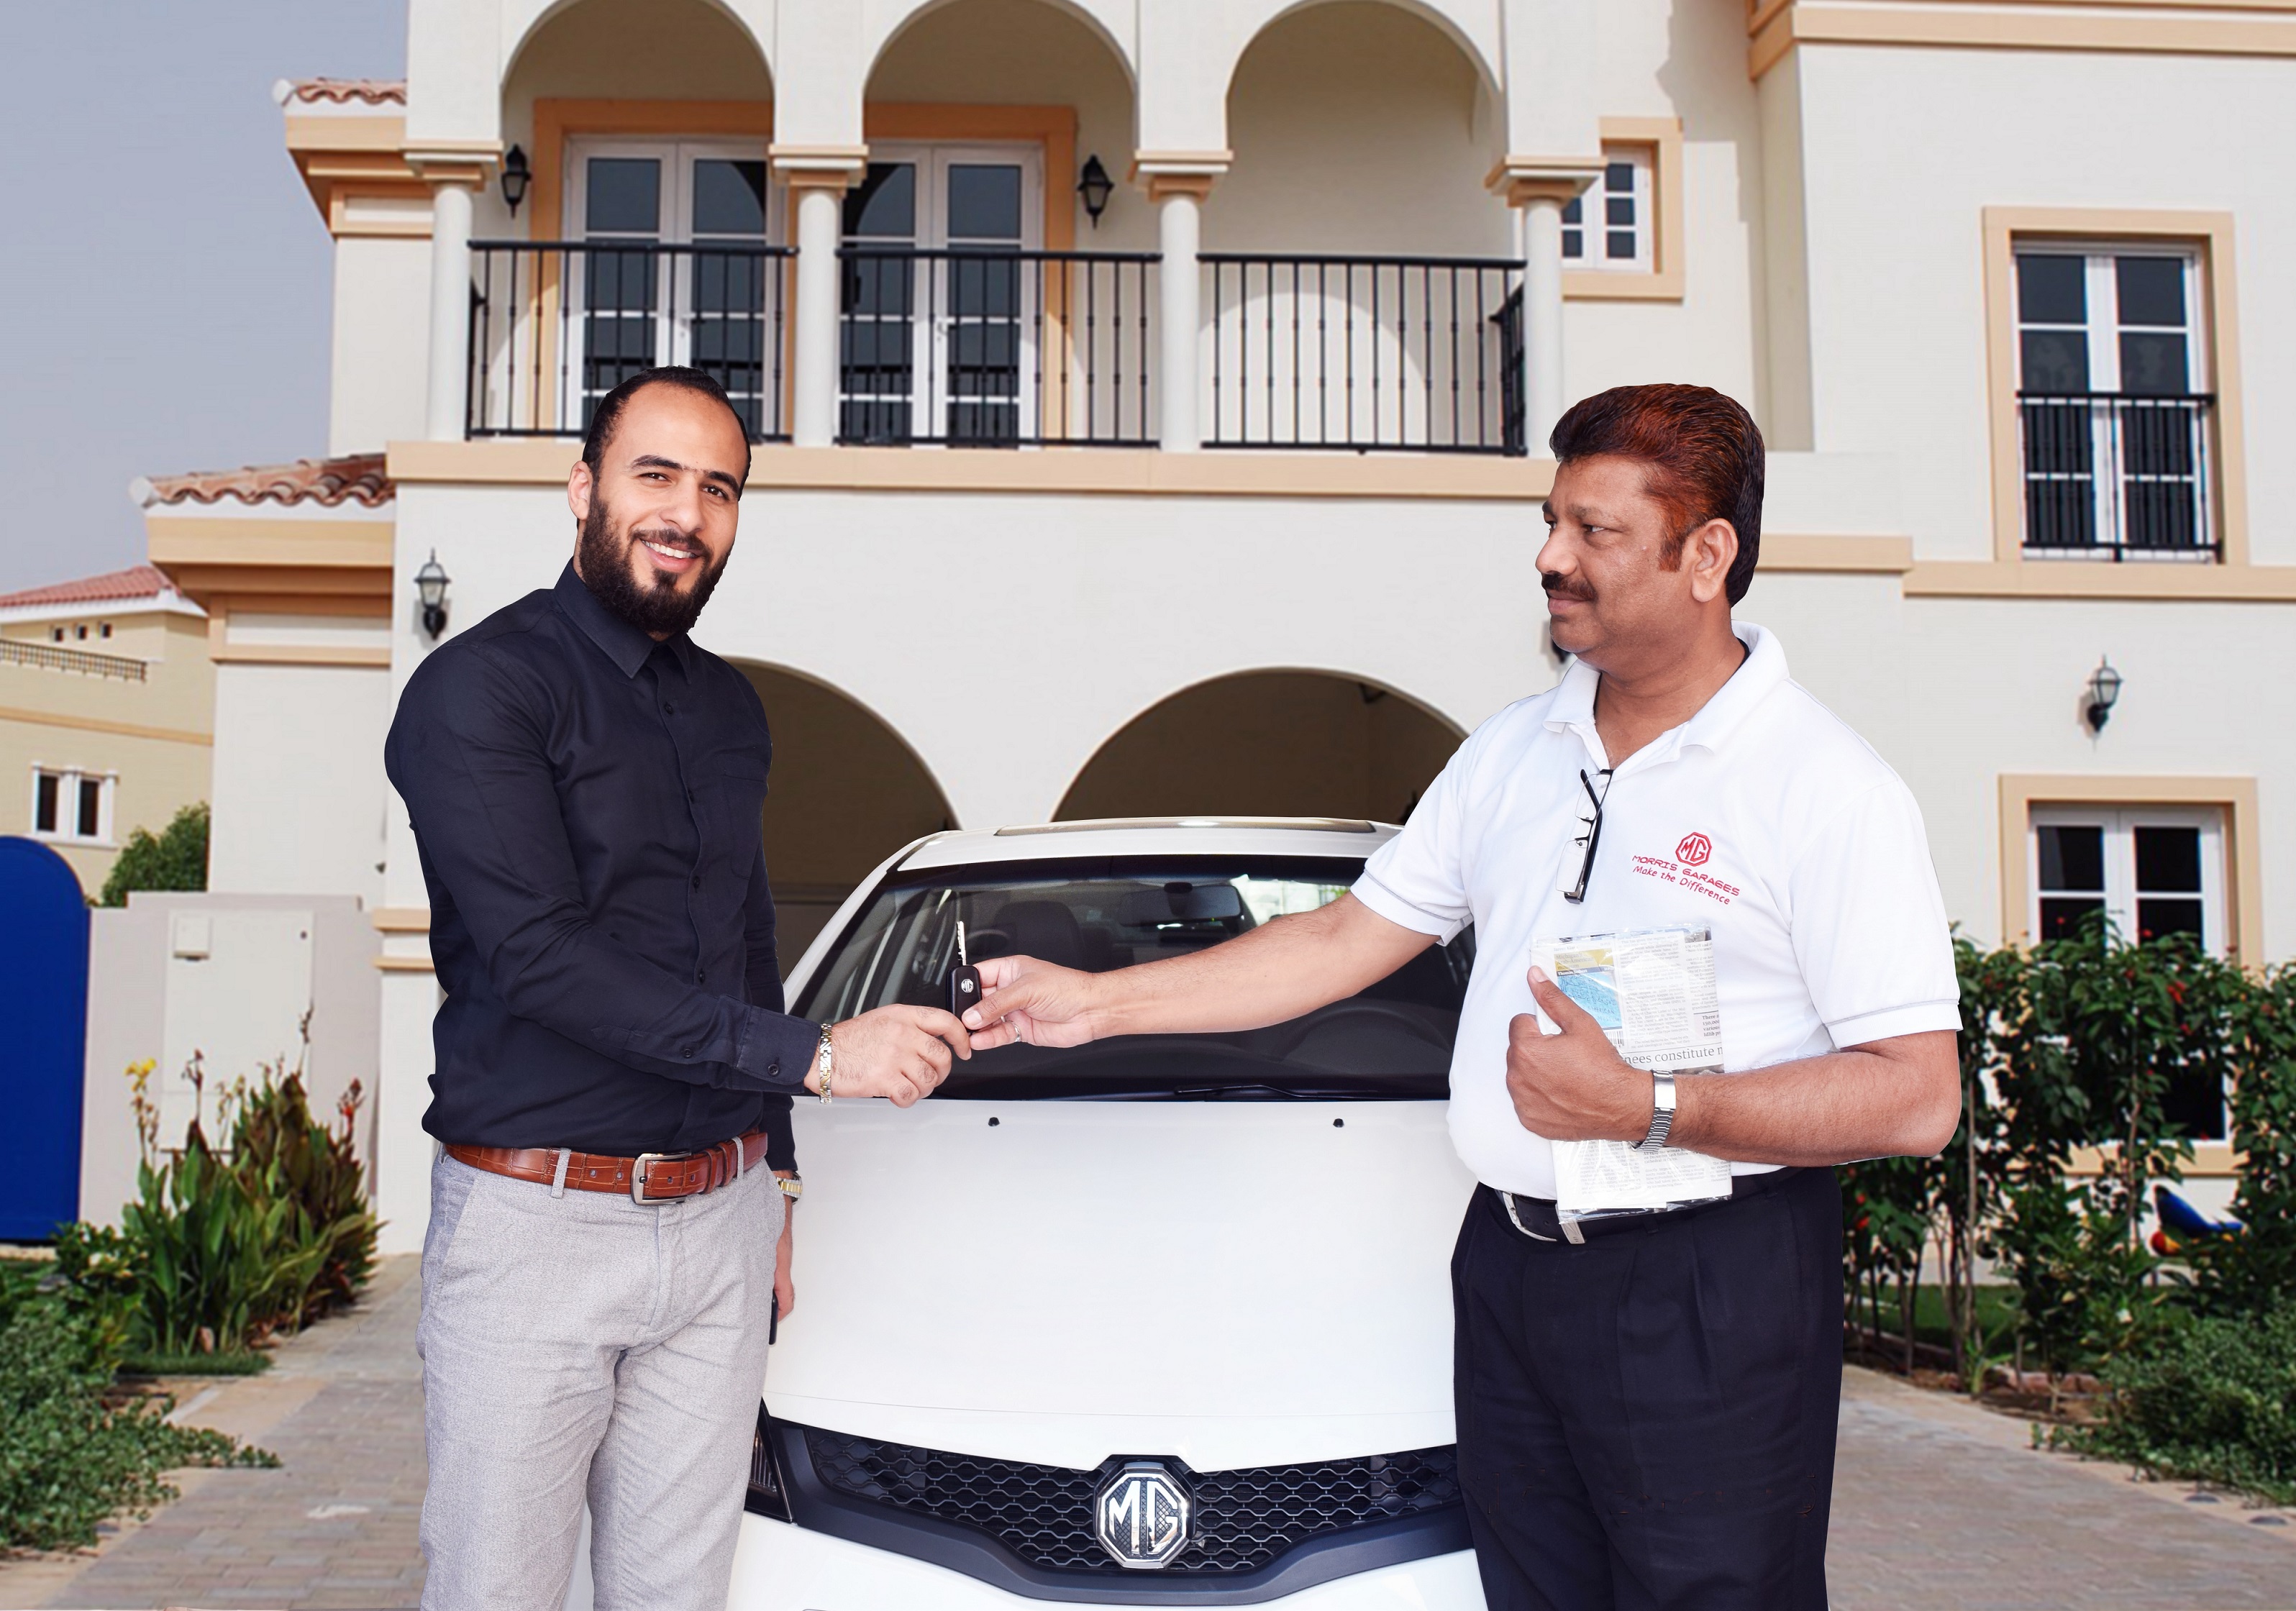 MG launches door-to-door aftersales service in the Middle East